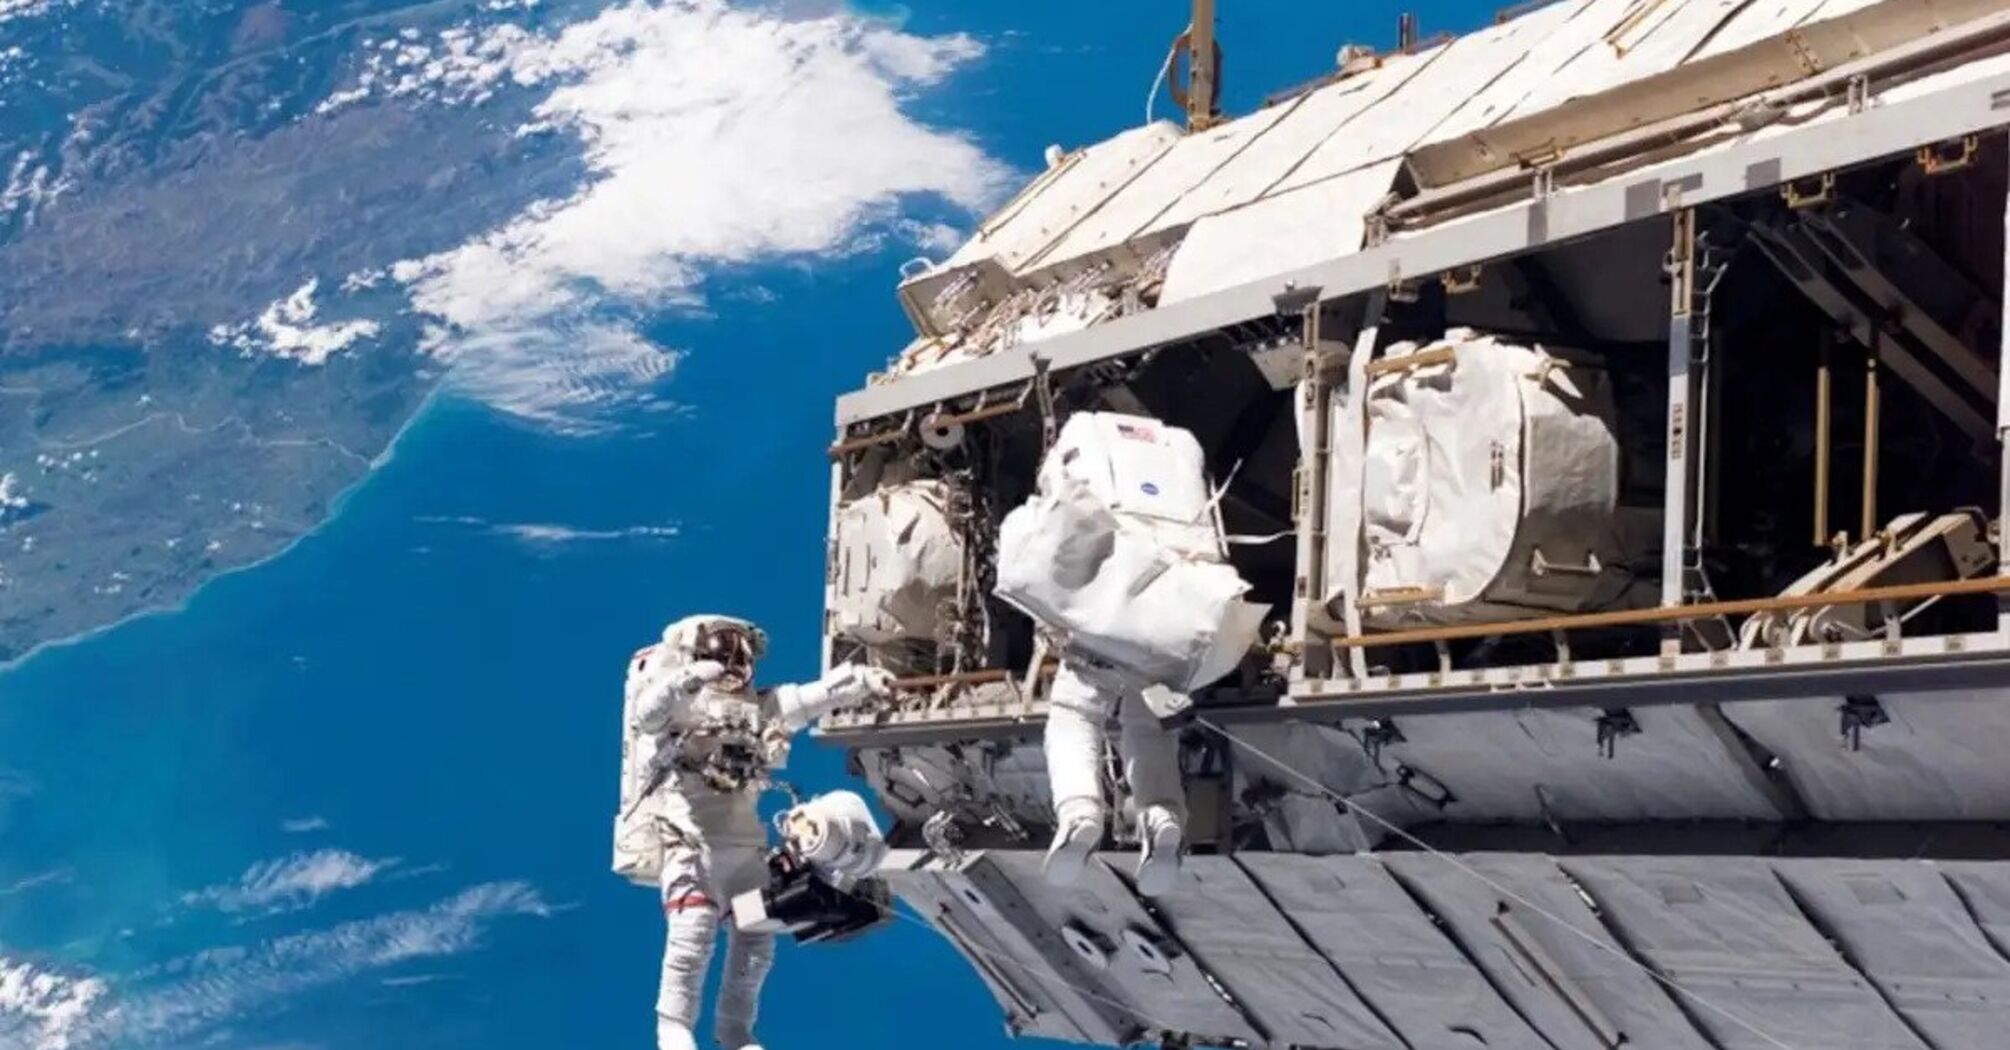 Researchers investigate the impacts of space travel on astronauts' eye health